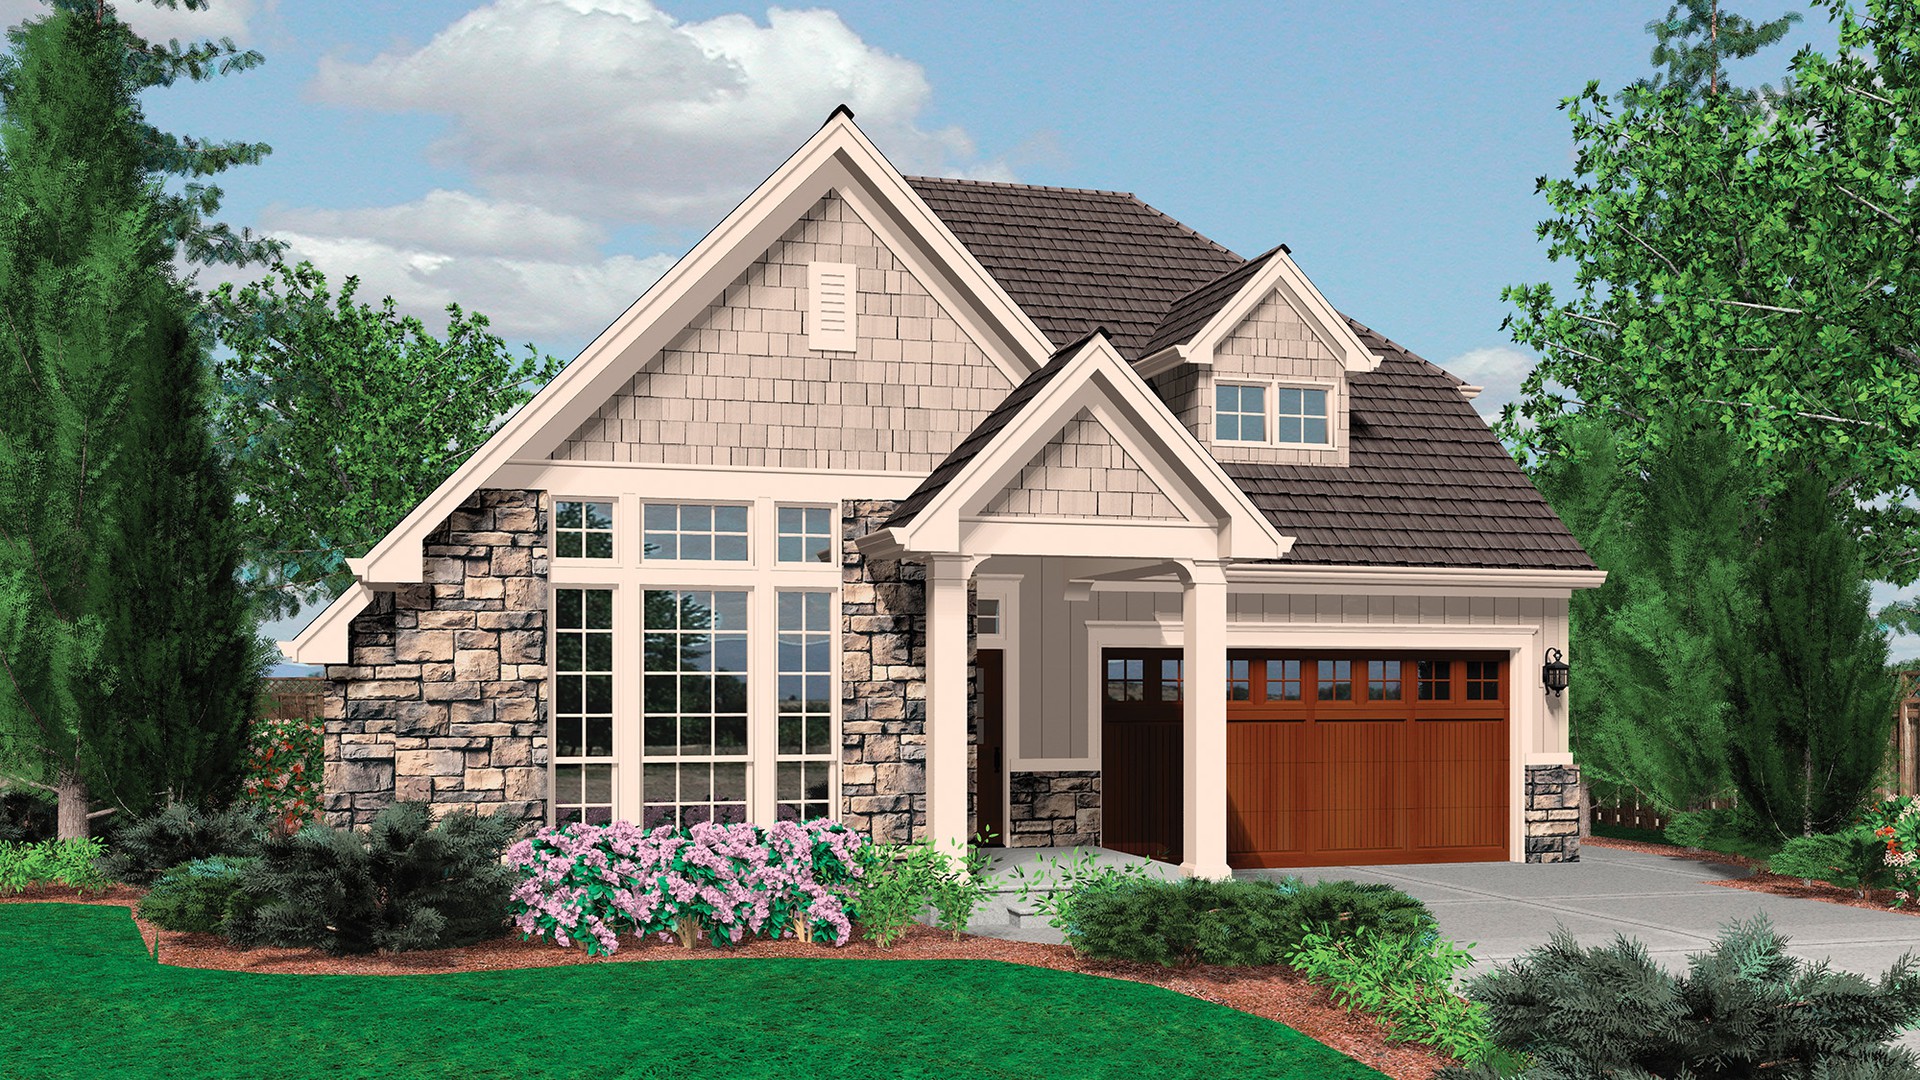 Cottage House Plan 21102A The Marshall: 1761 Sqft, 3 Bedrooms, 2.1